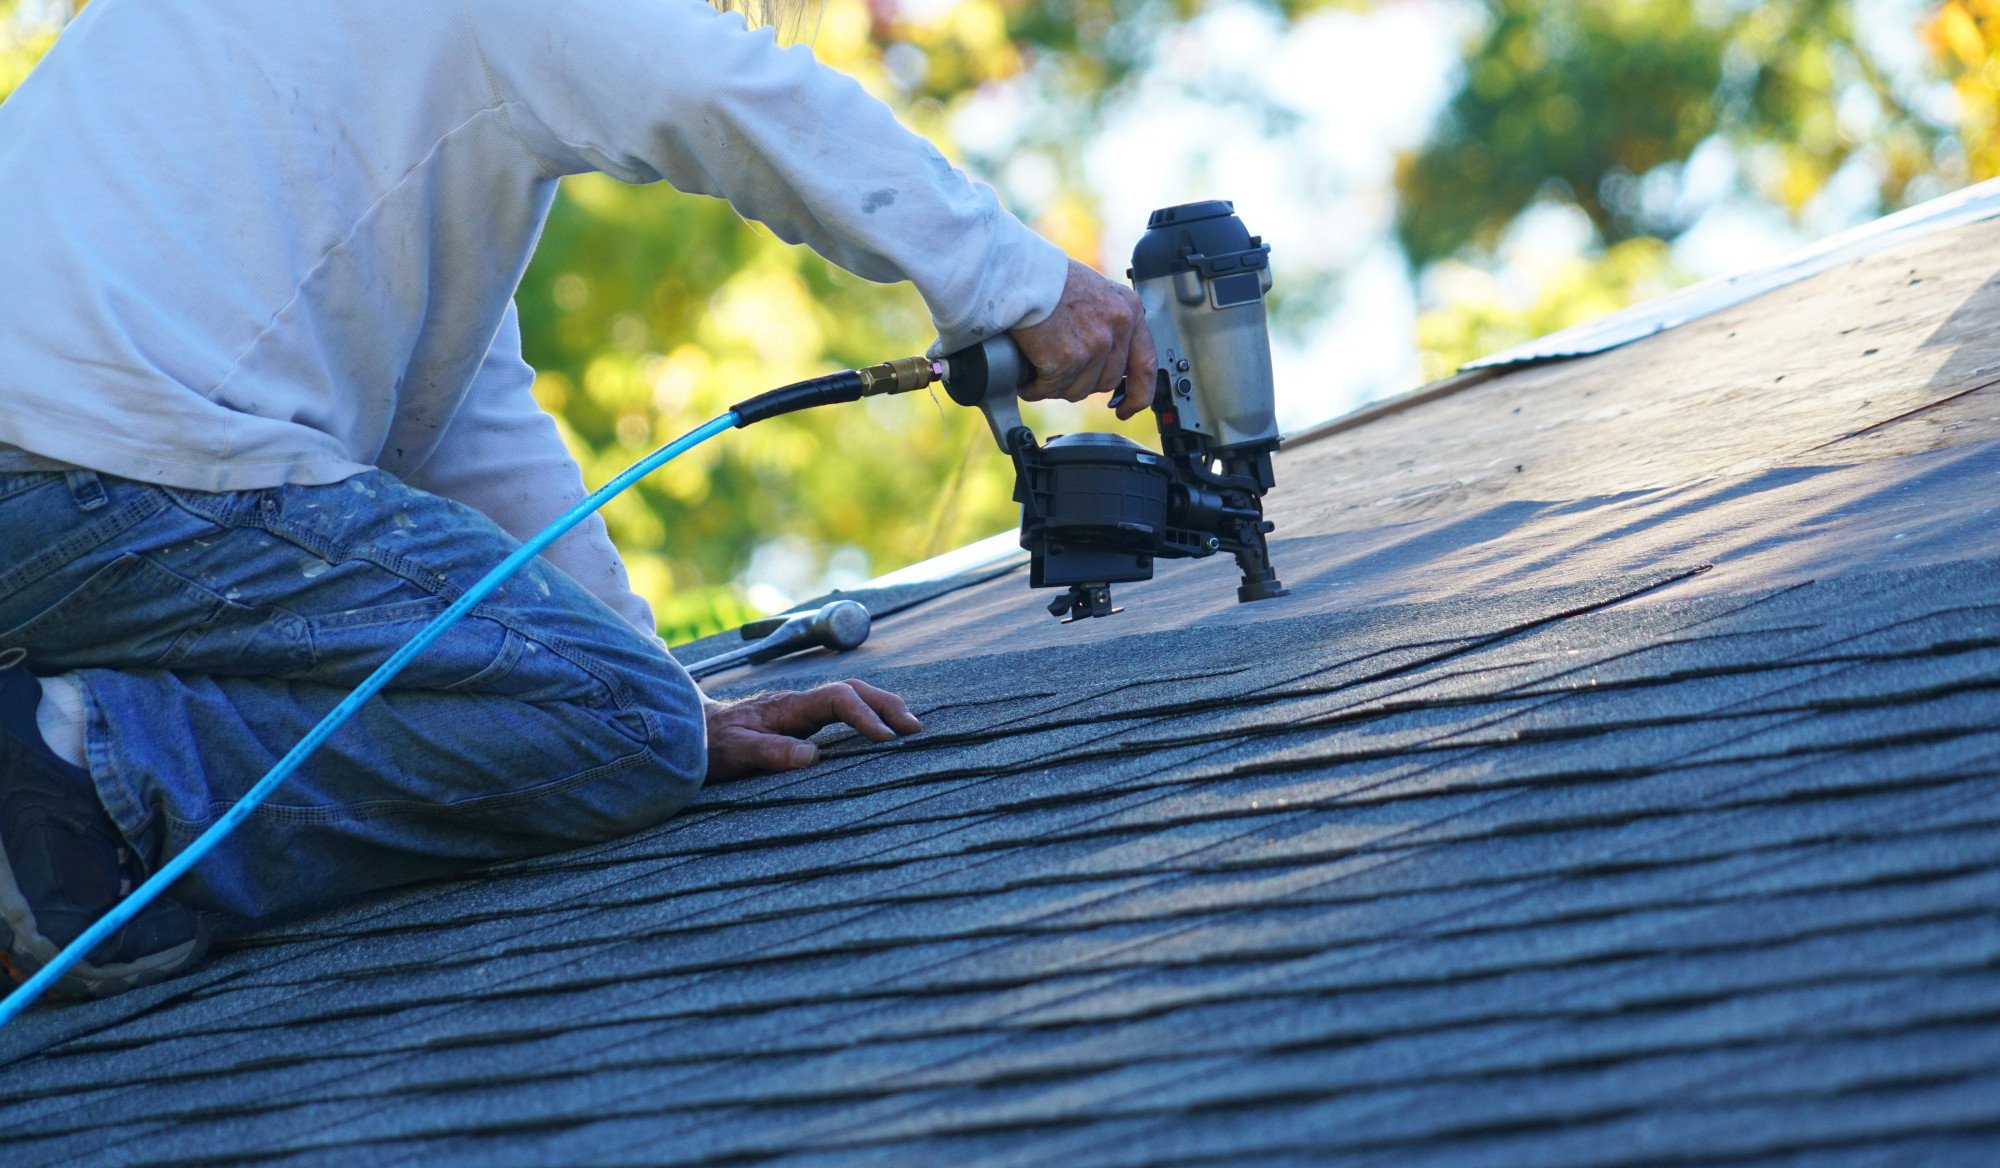 Garage roof repair is no easy task and you might need to hire professionals. Learn what homeowners should know in this guide.